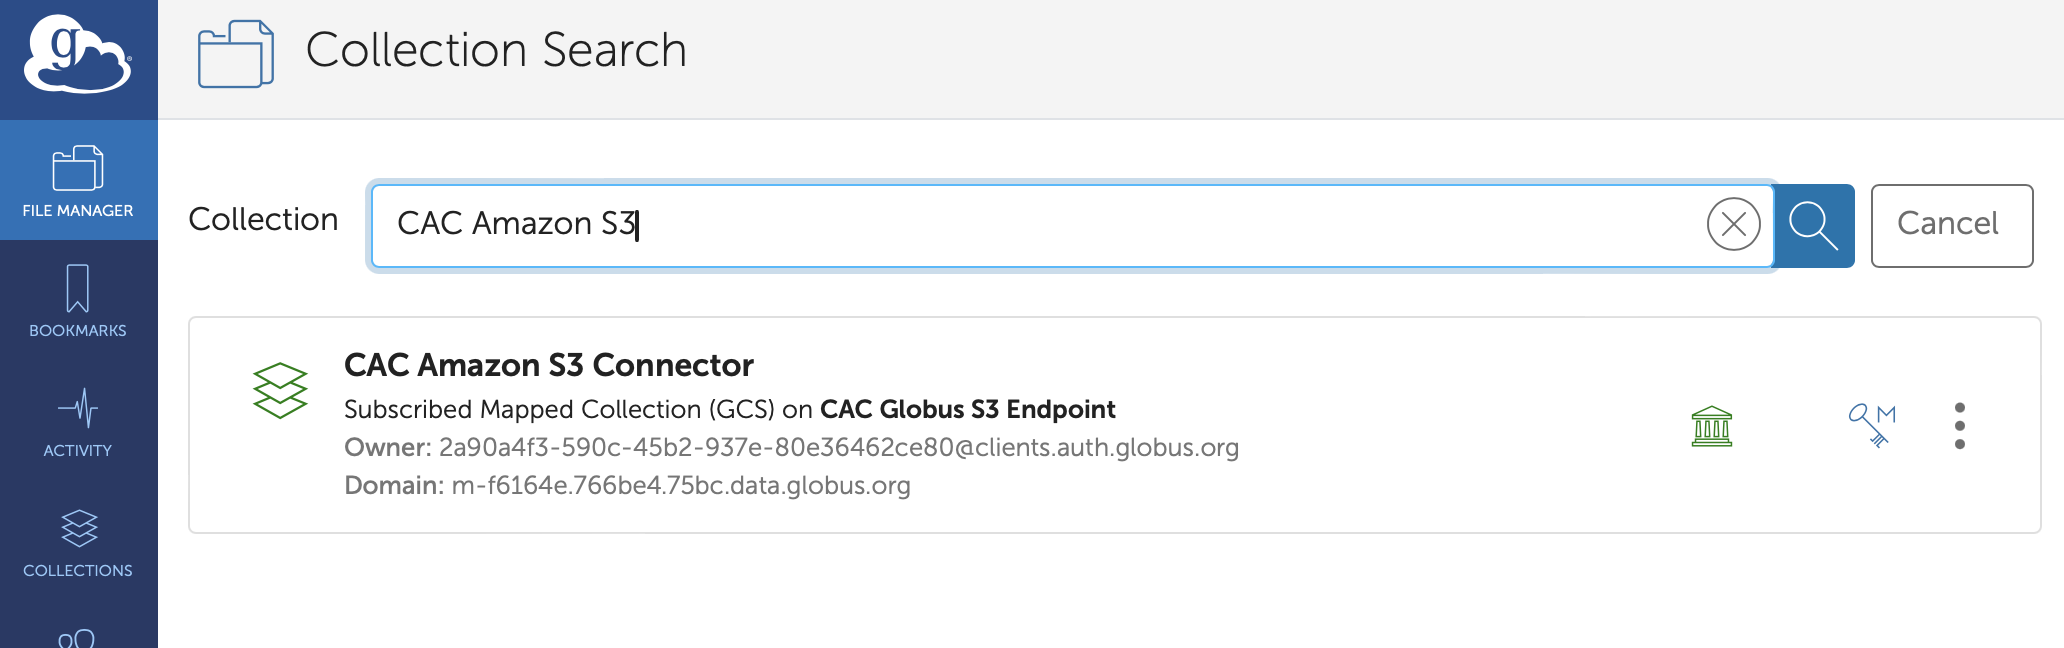 Search for CAC Amazon S3 Connector